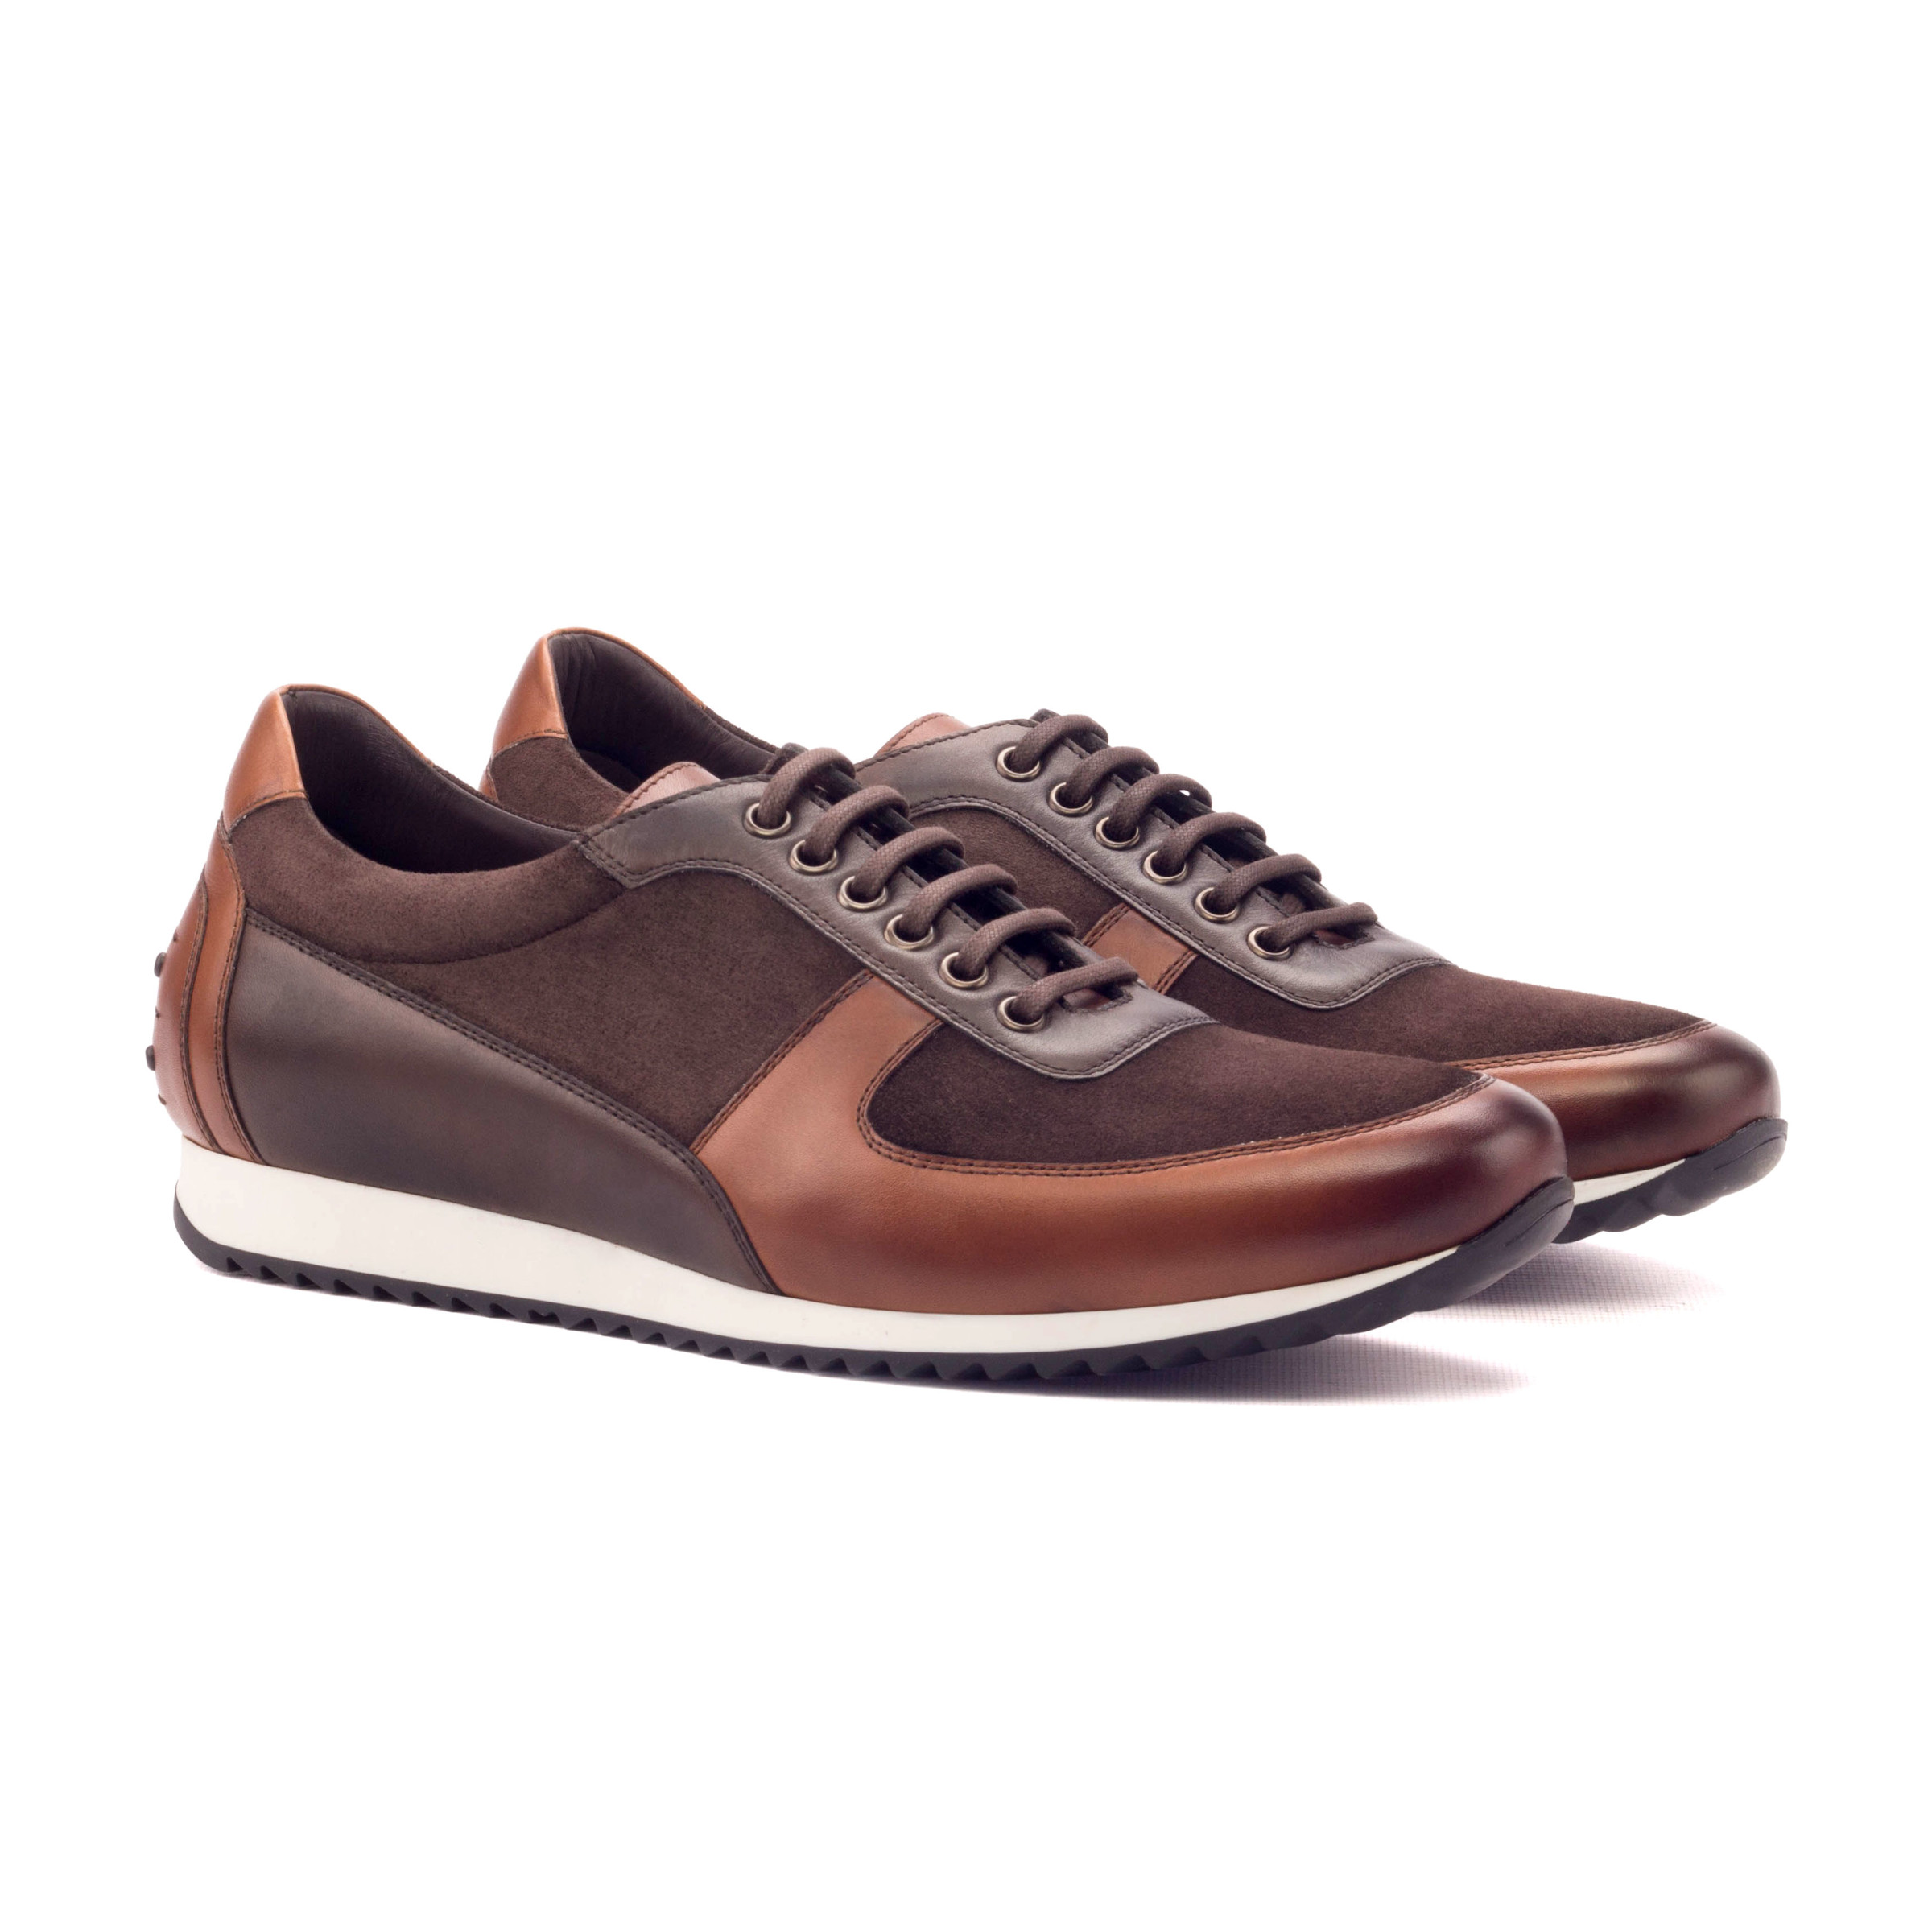 The Ferruccio: Cafe Leather/Chocolate Suede. medium brown and dark brown painted calf leather with brown kid suede lace up vintage style sneakers on a white background